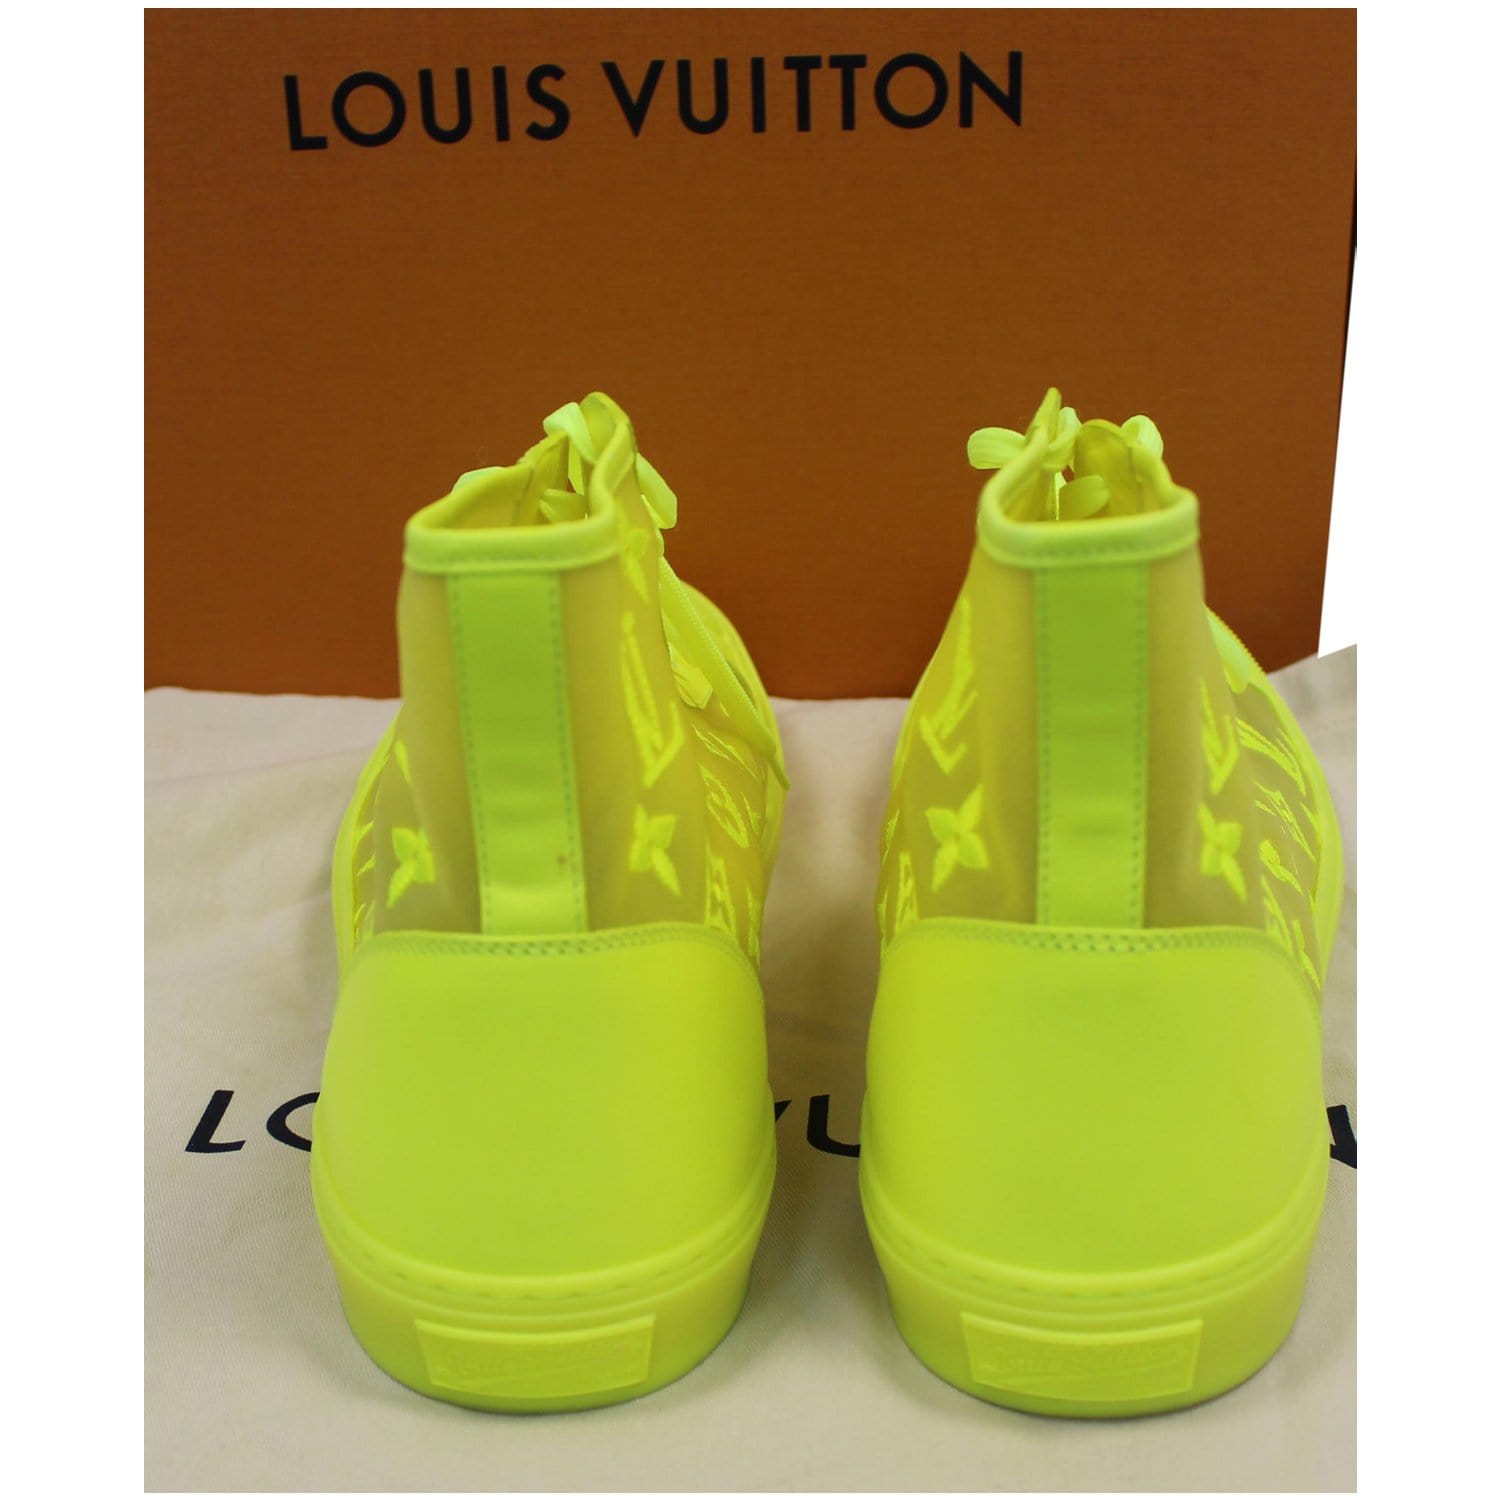 Louis Vuitton Brand Name And Logo Print Low Top Shoes - Tagotee